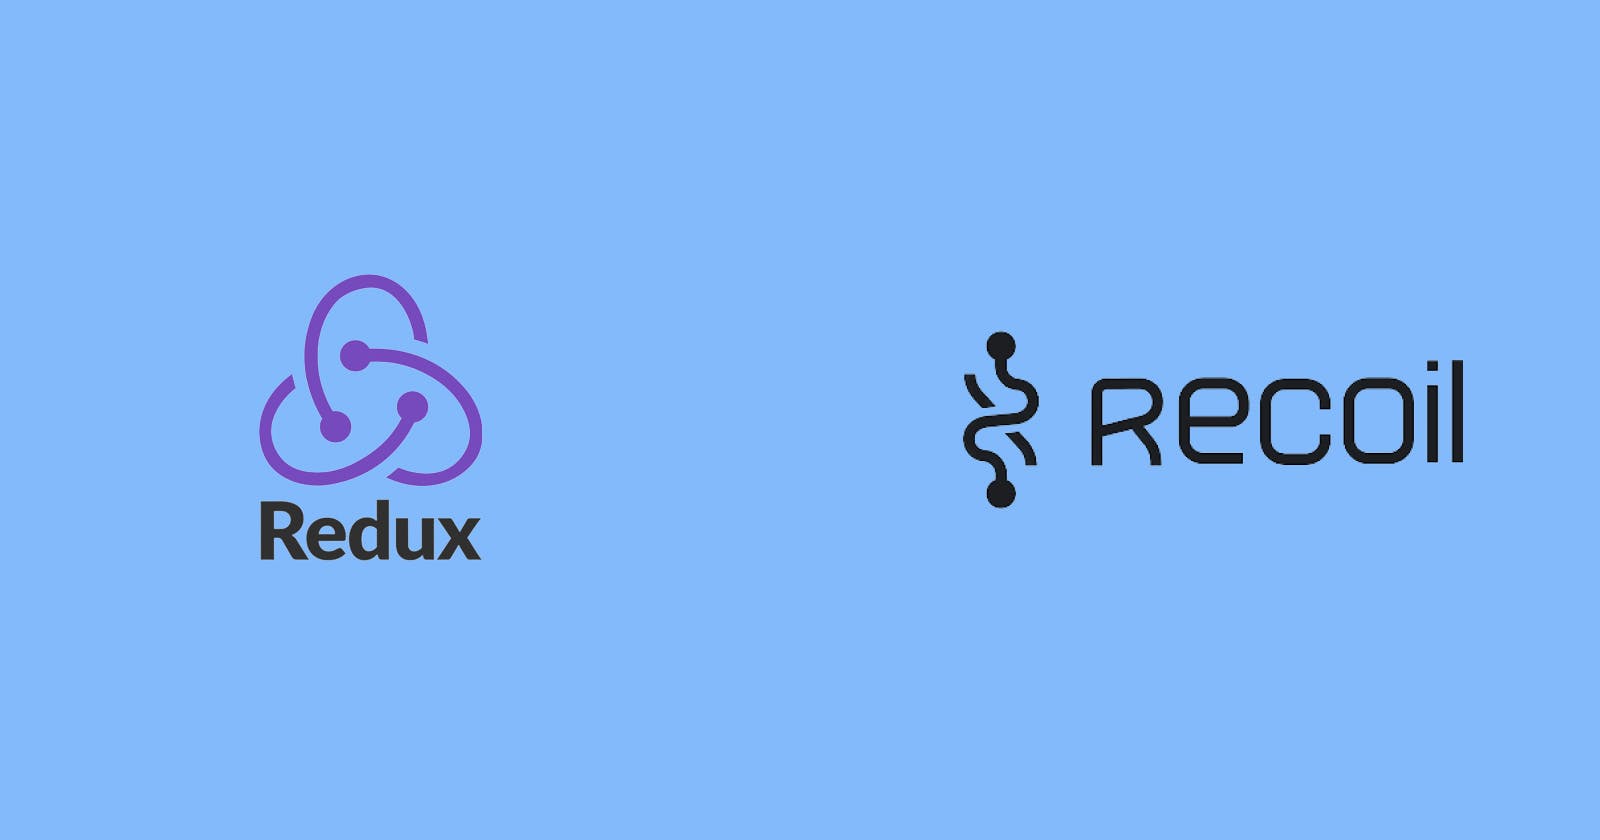 Why I chose Recoil over Redux